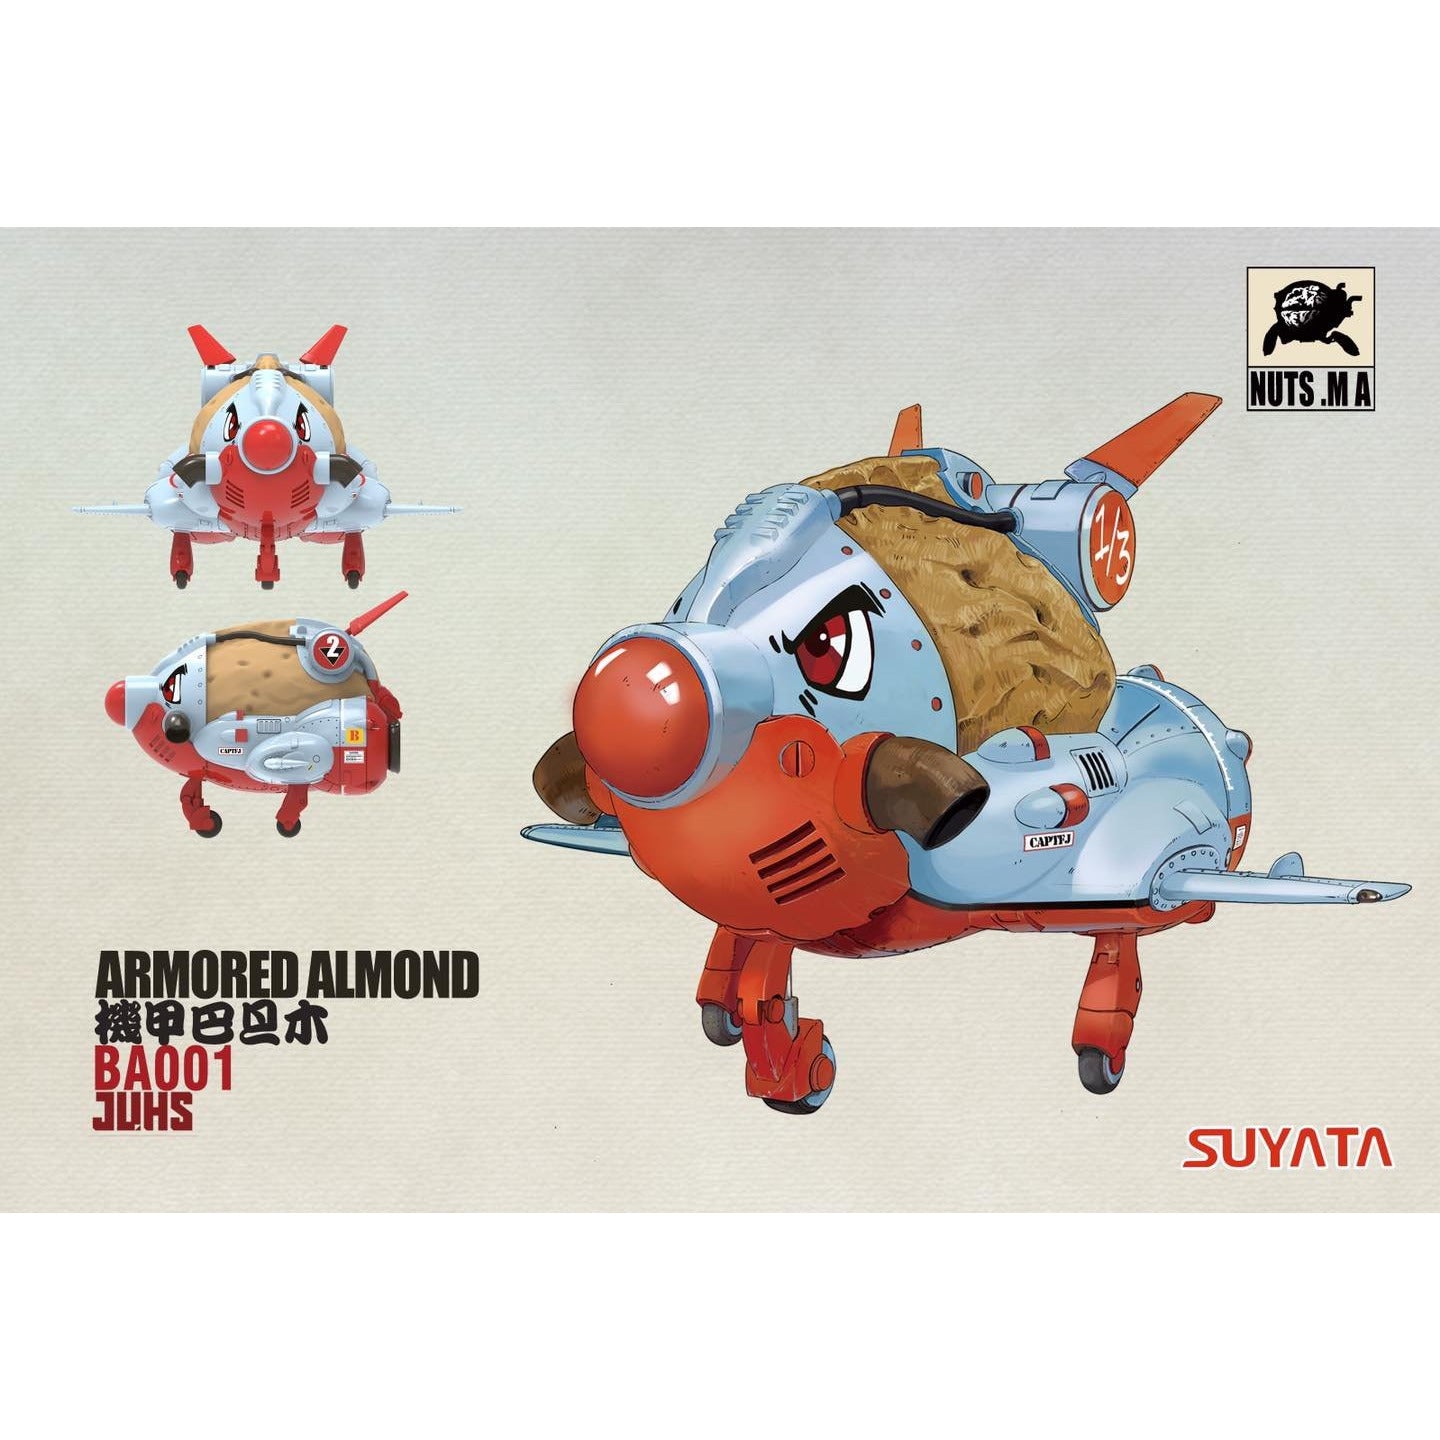 Armored Almond #001 by Suyata